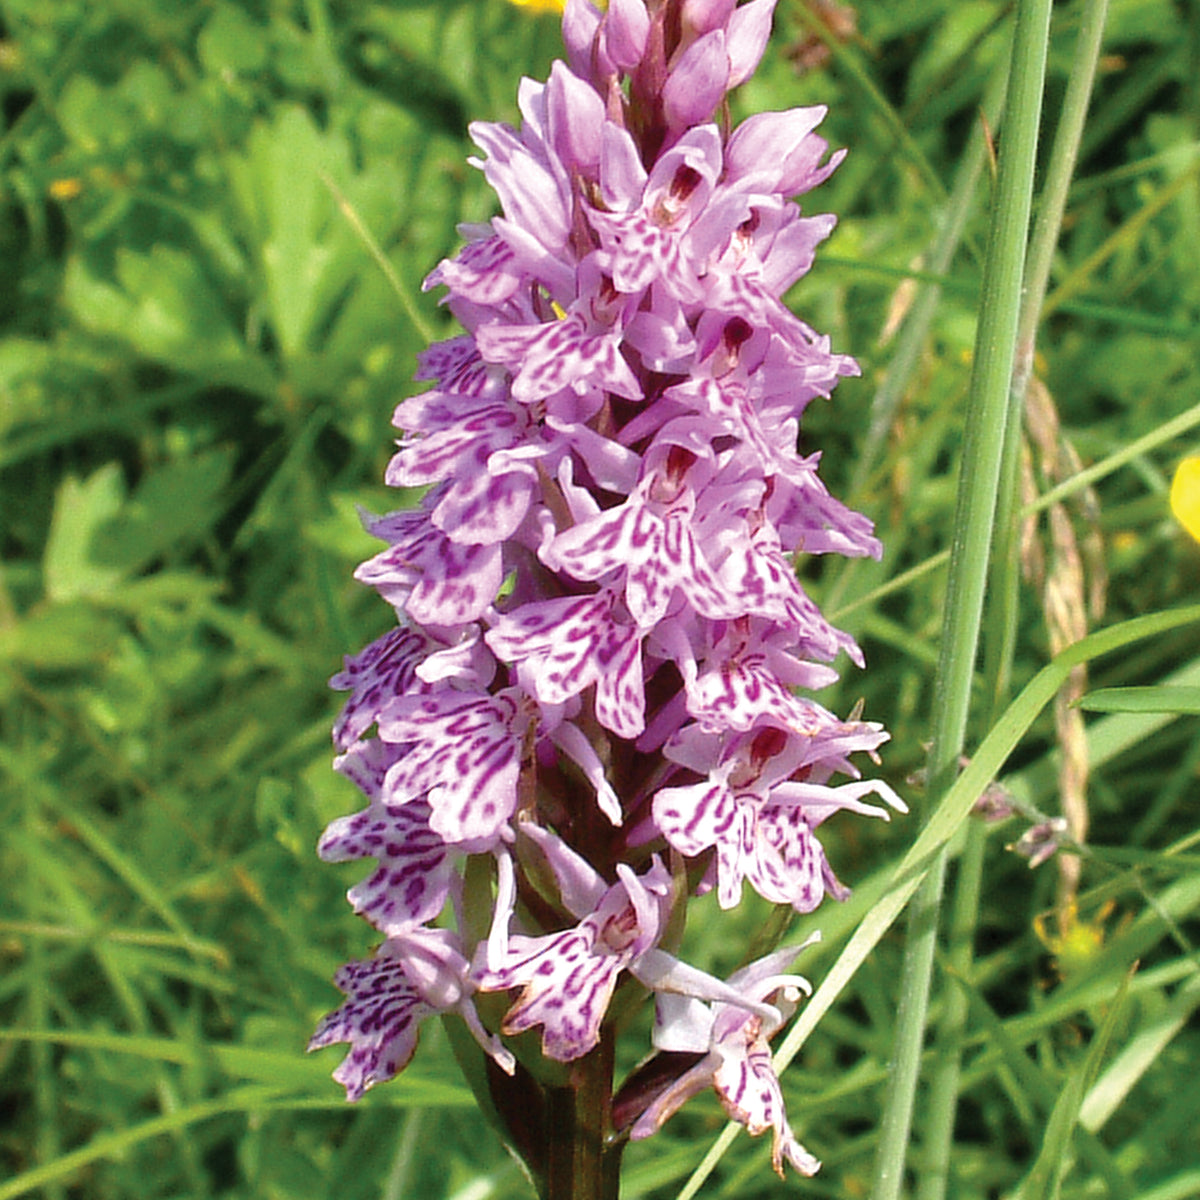 Spotted Orchid